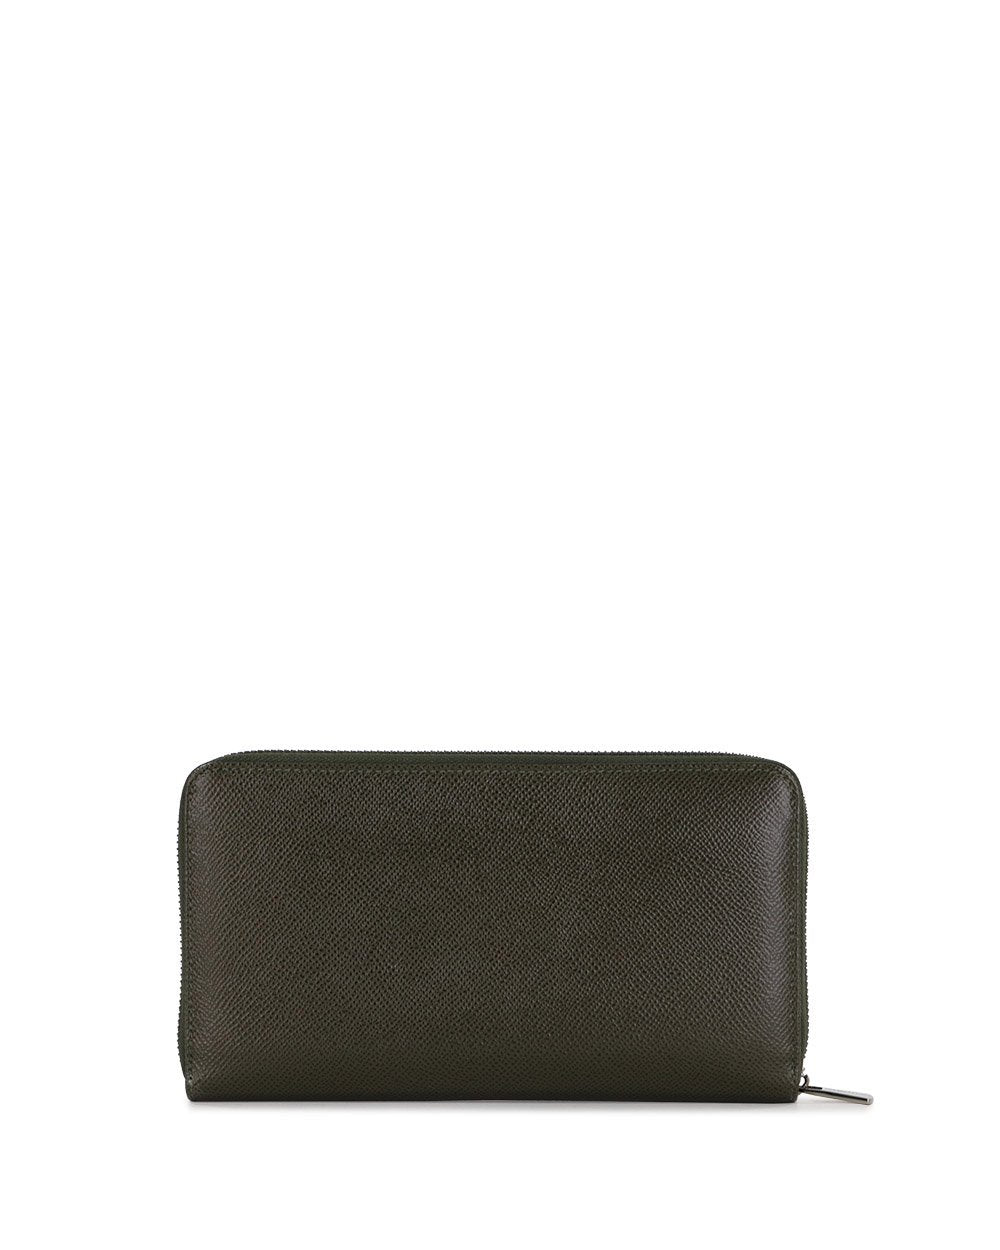 Hammered Leather Long Wallet - ISSI Outlet